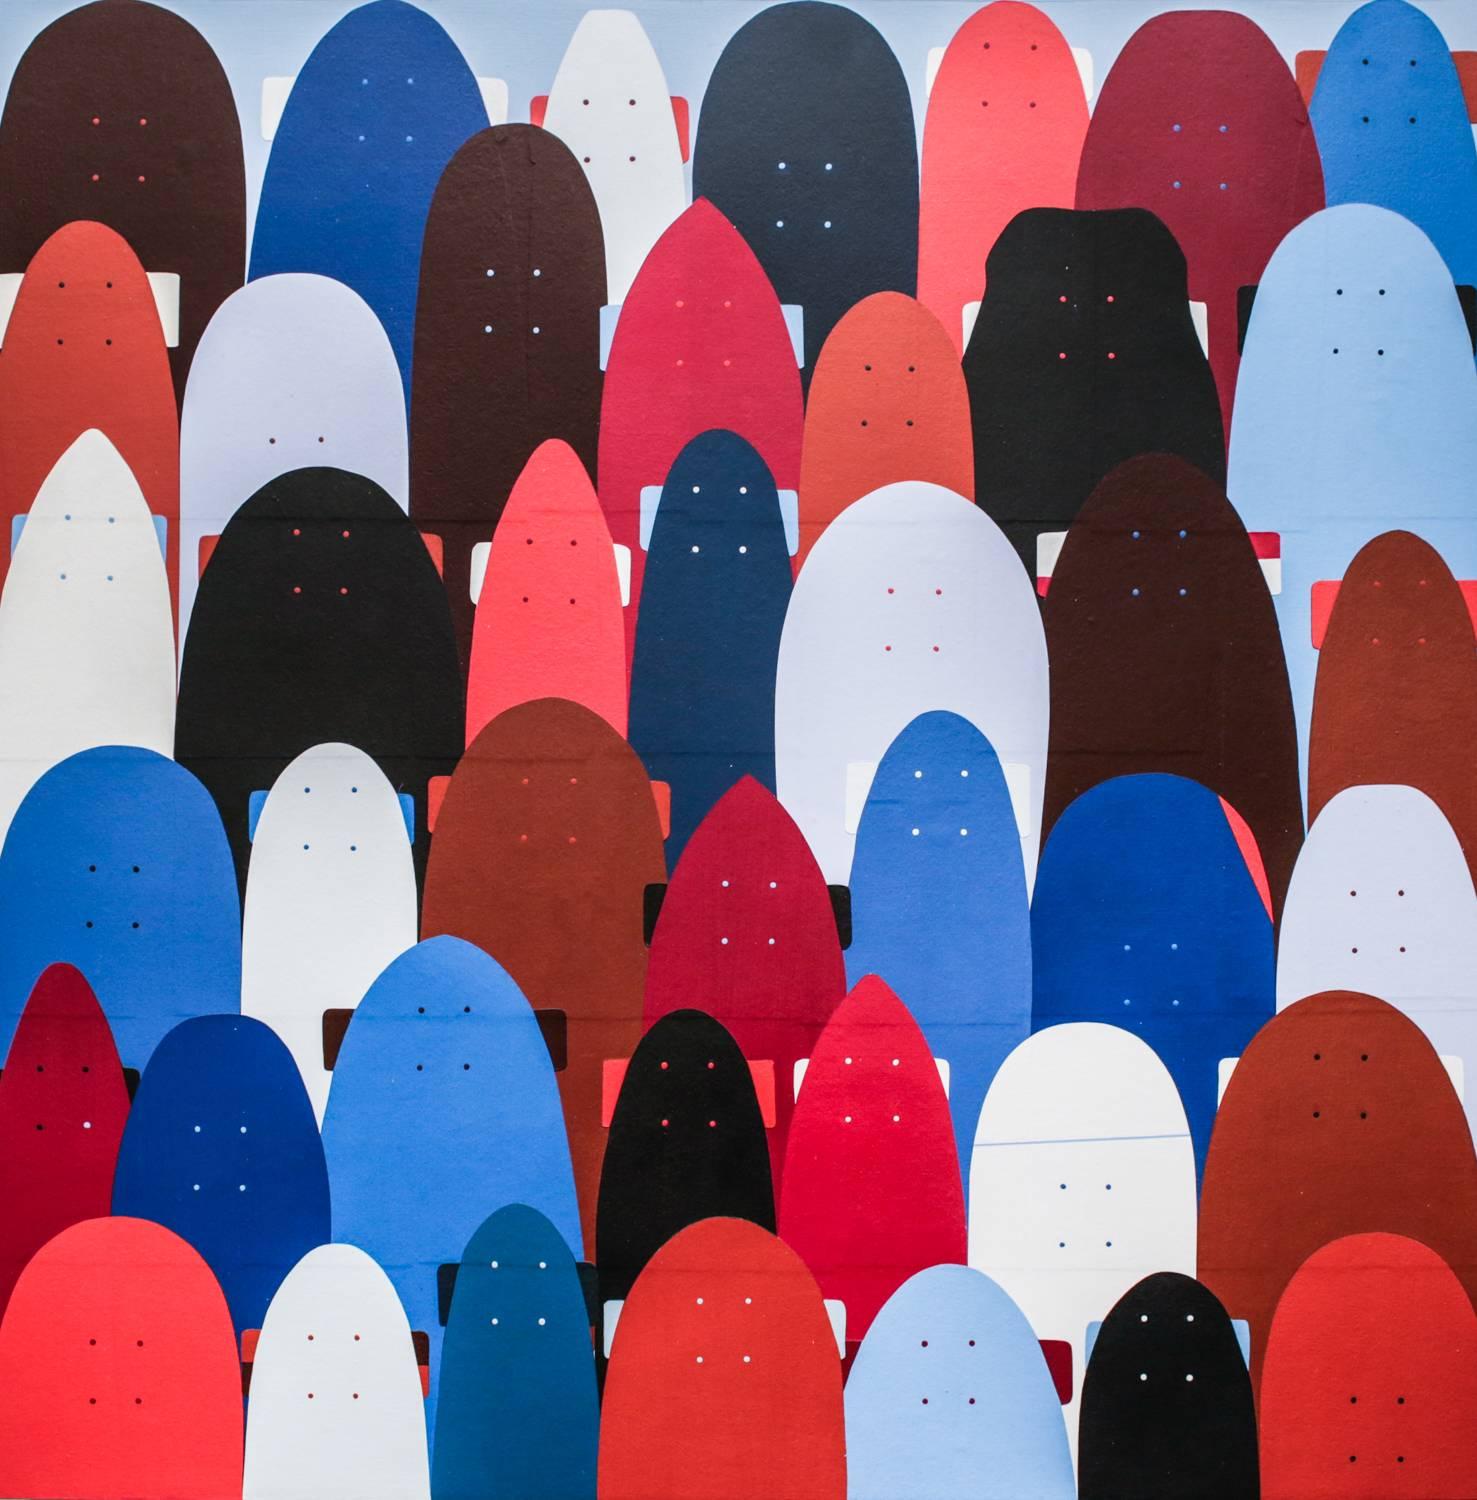 Abstract Painting Jim Houser - "THE LINE UP" Collage on panel, skateboard motifs, pattern, red white blue